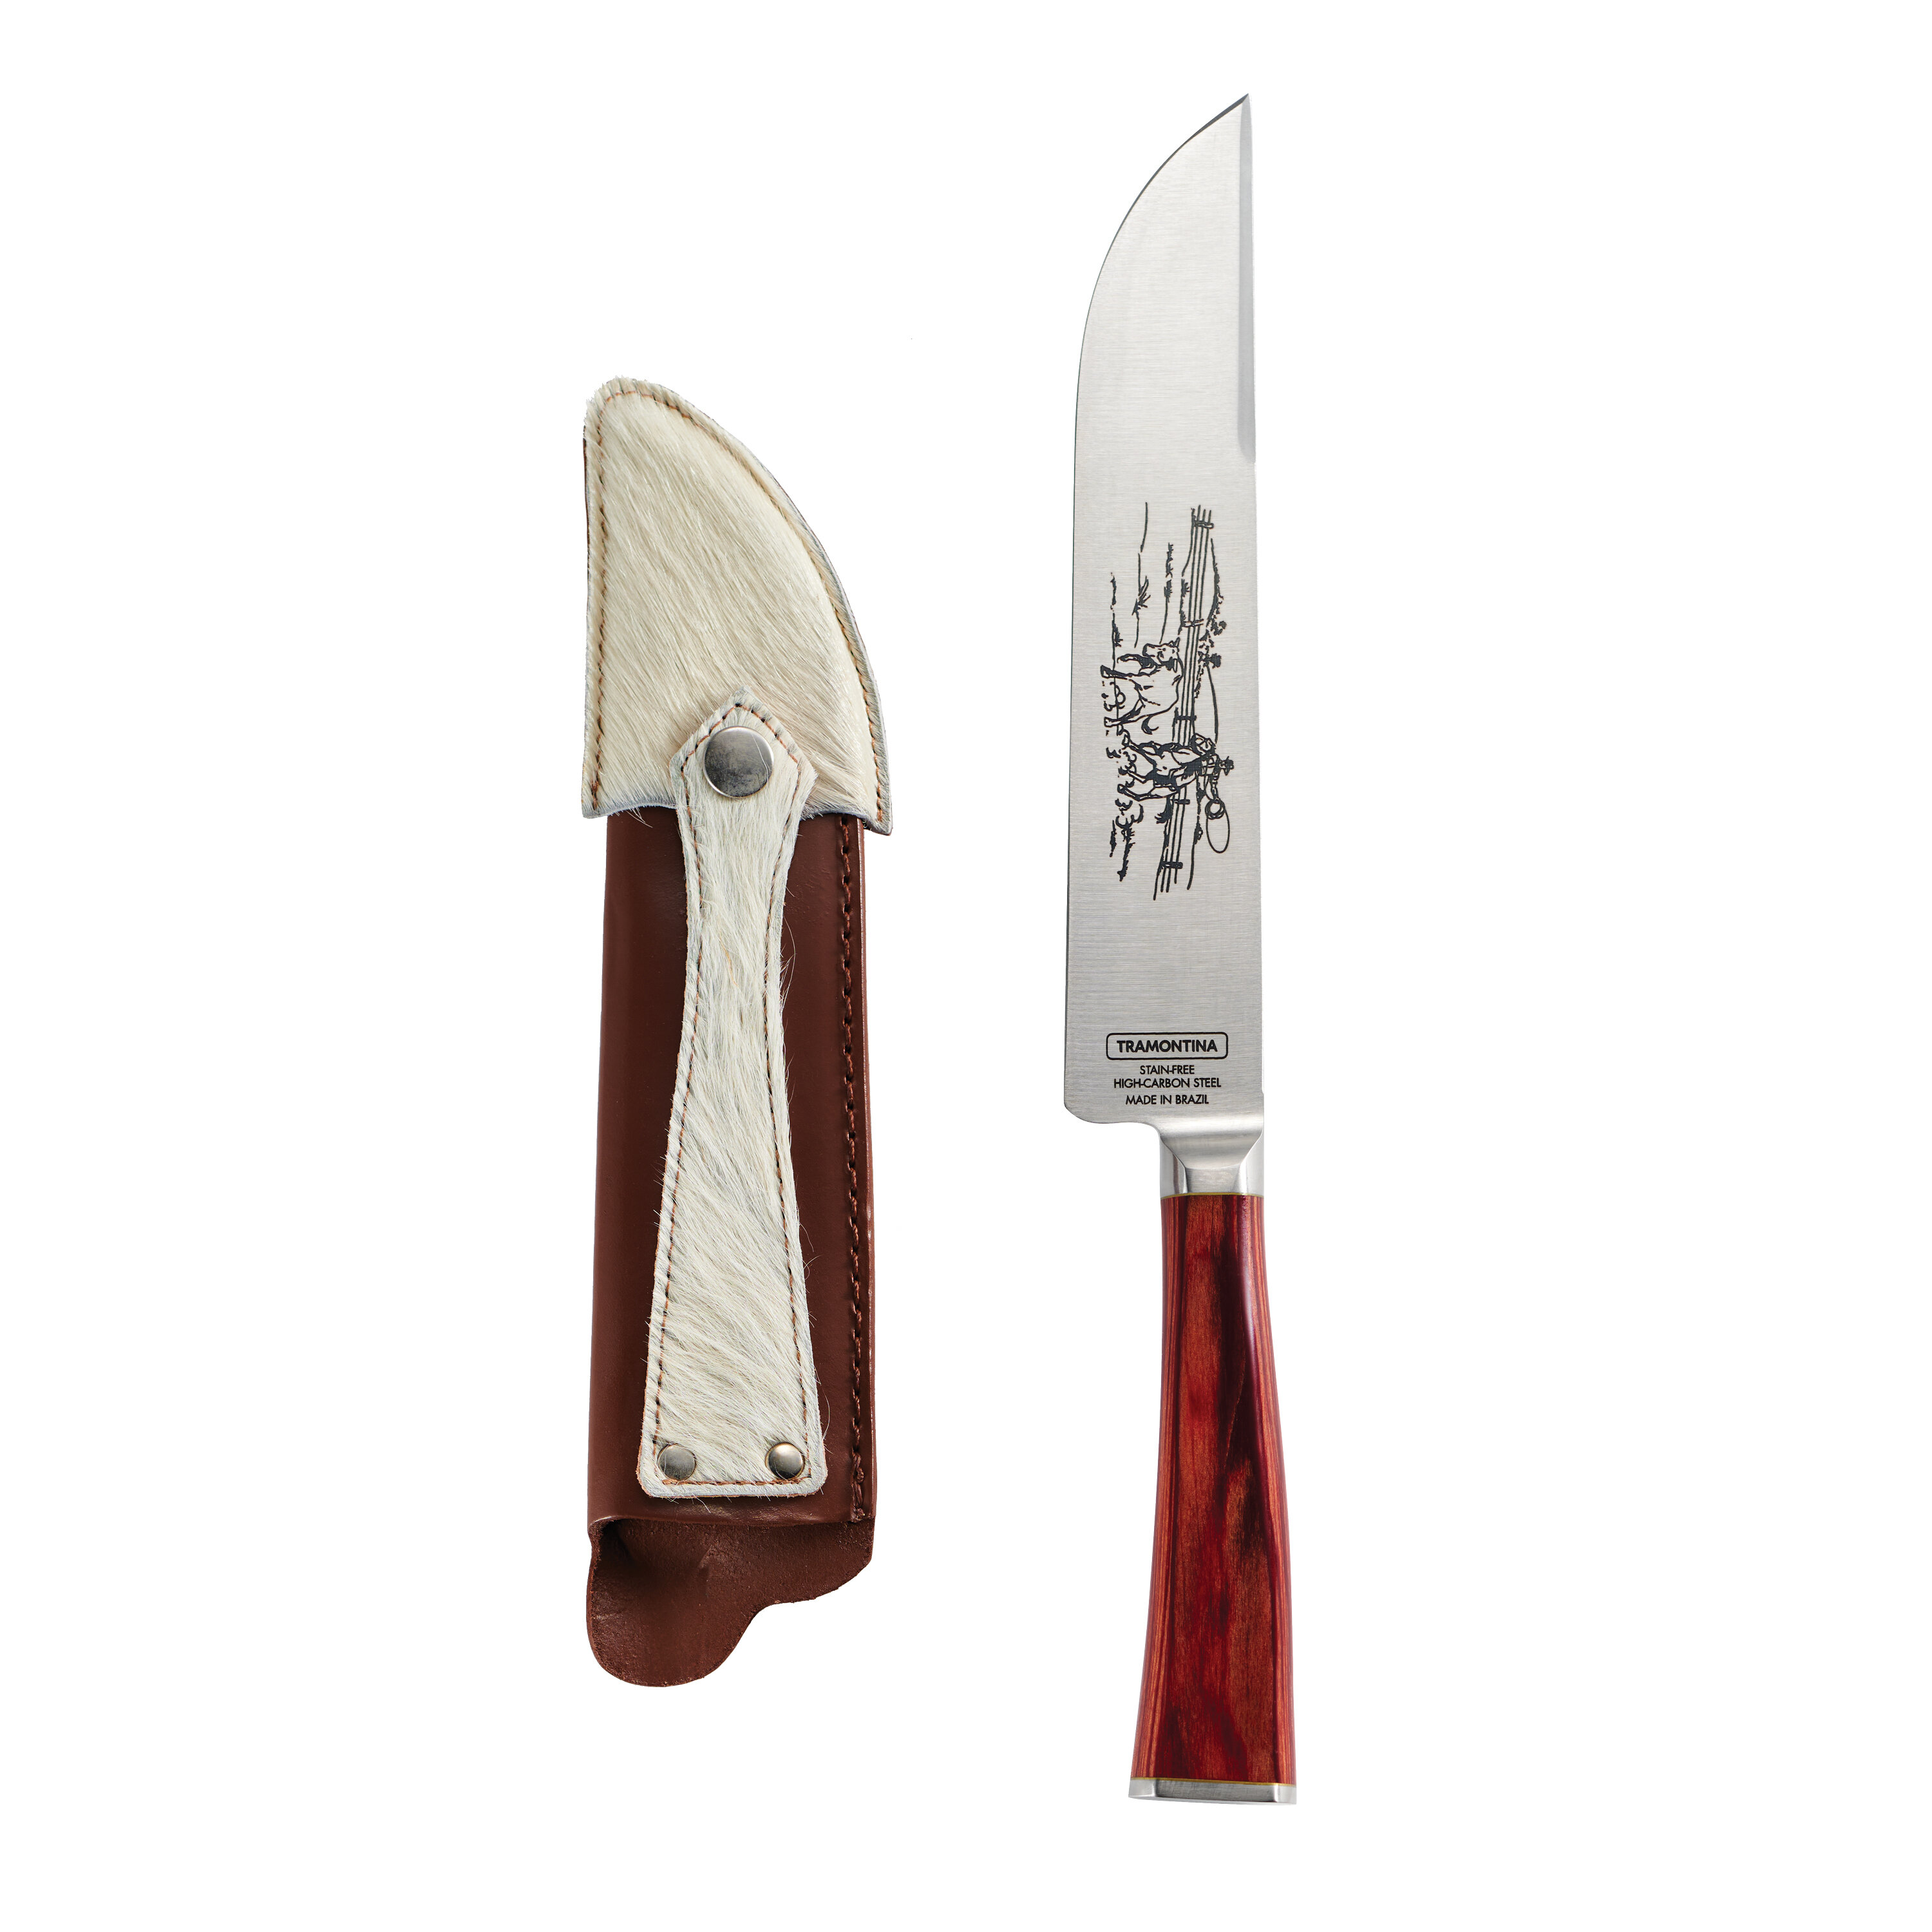 Zyliss Chef's Knife with Sheath Cover, 7.5 inch